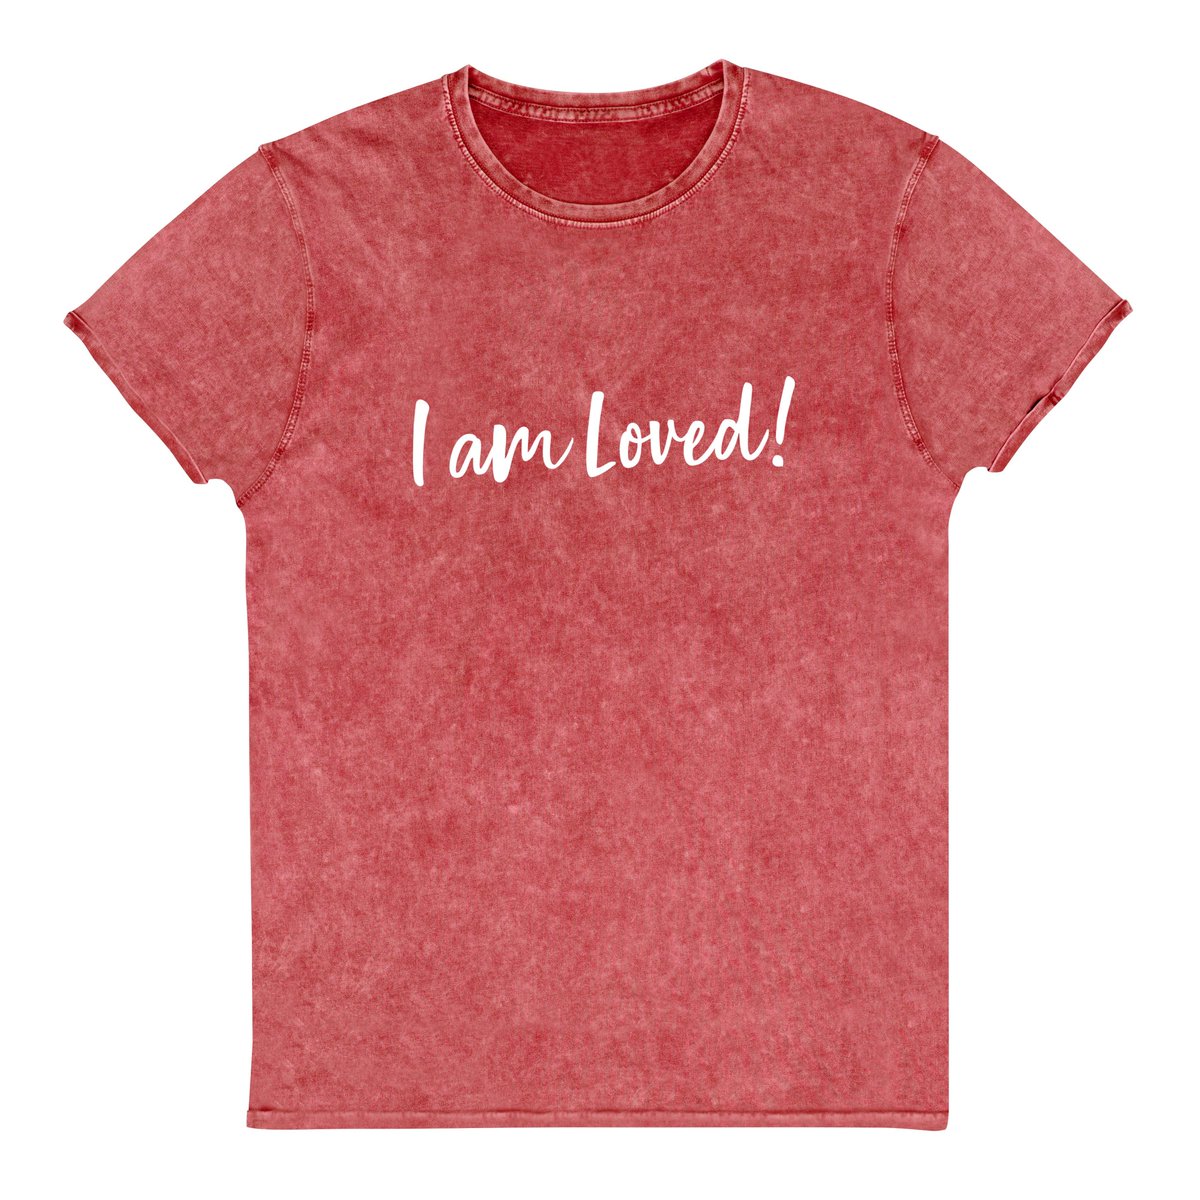 NEW FOR JUNE!
Ladies, I am Loved, Tee!

Order your, I am Loved, tee today! justduckytees.com/store/p36/I_Am…

#justduckytees #iamloved #tees #tshirts #shirts #graphictees #faith #apparel #apparelbrand #clothing #clothingbrand